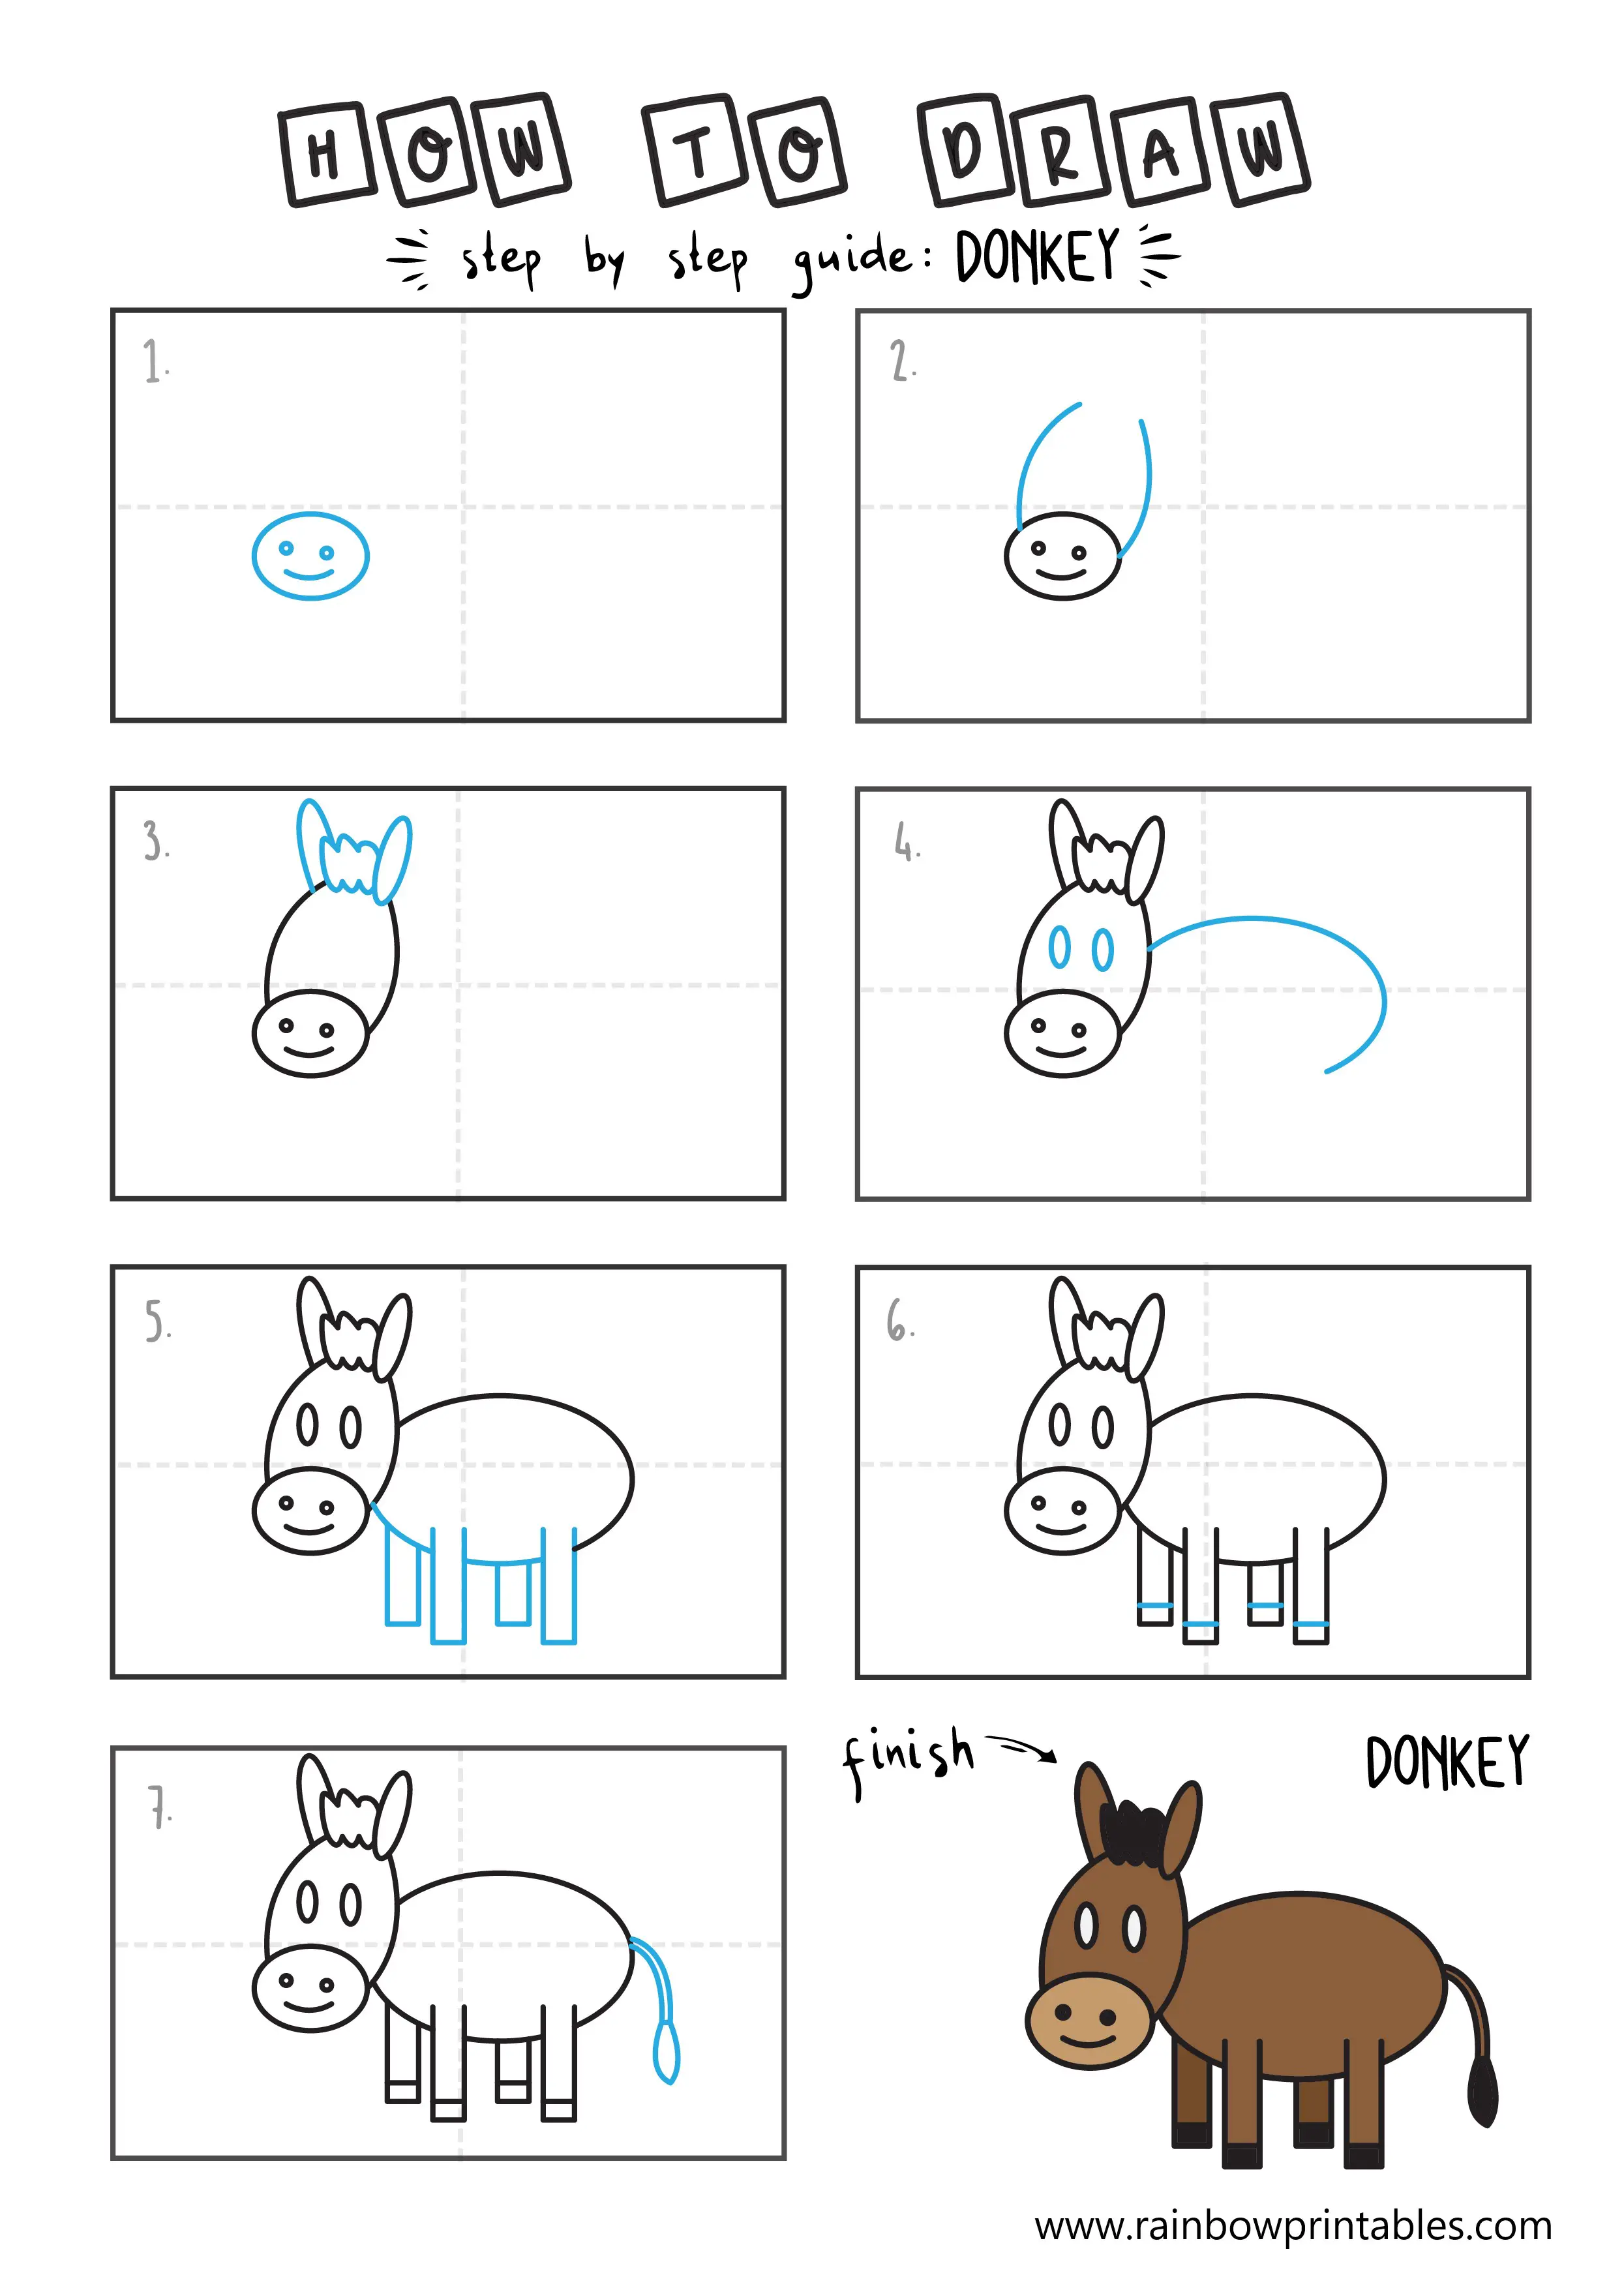 How To Draw a DONKEY Easy Step By Step For Kids Illustration Art Ideas